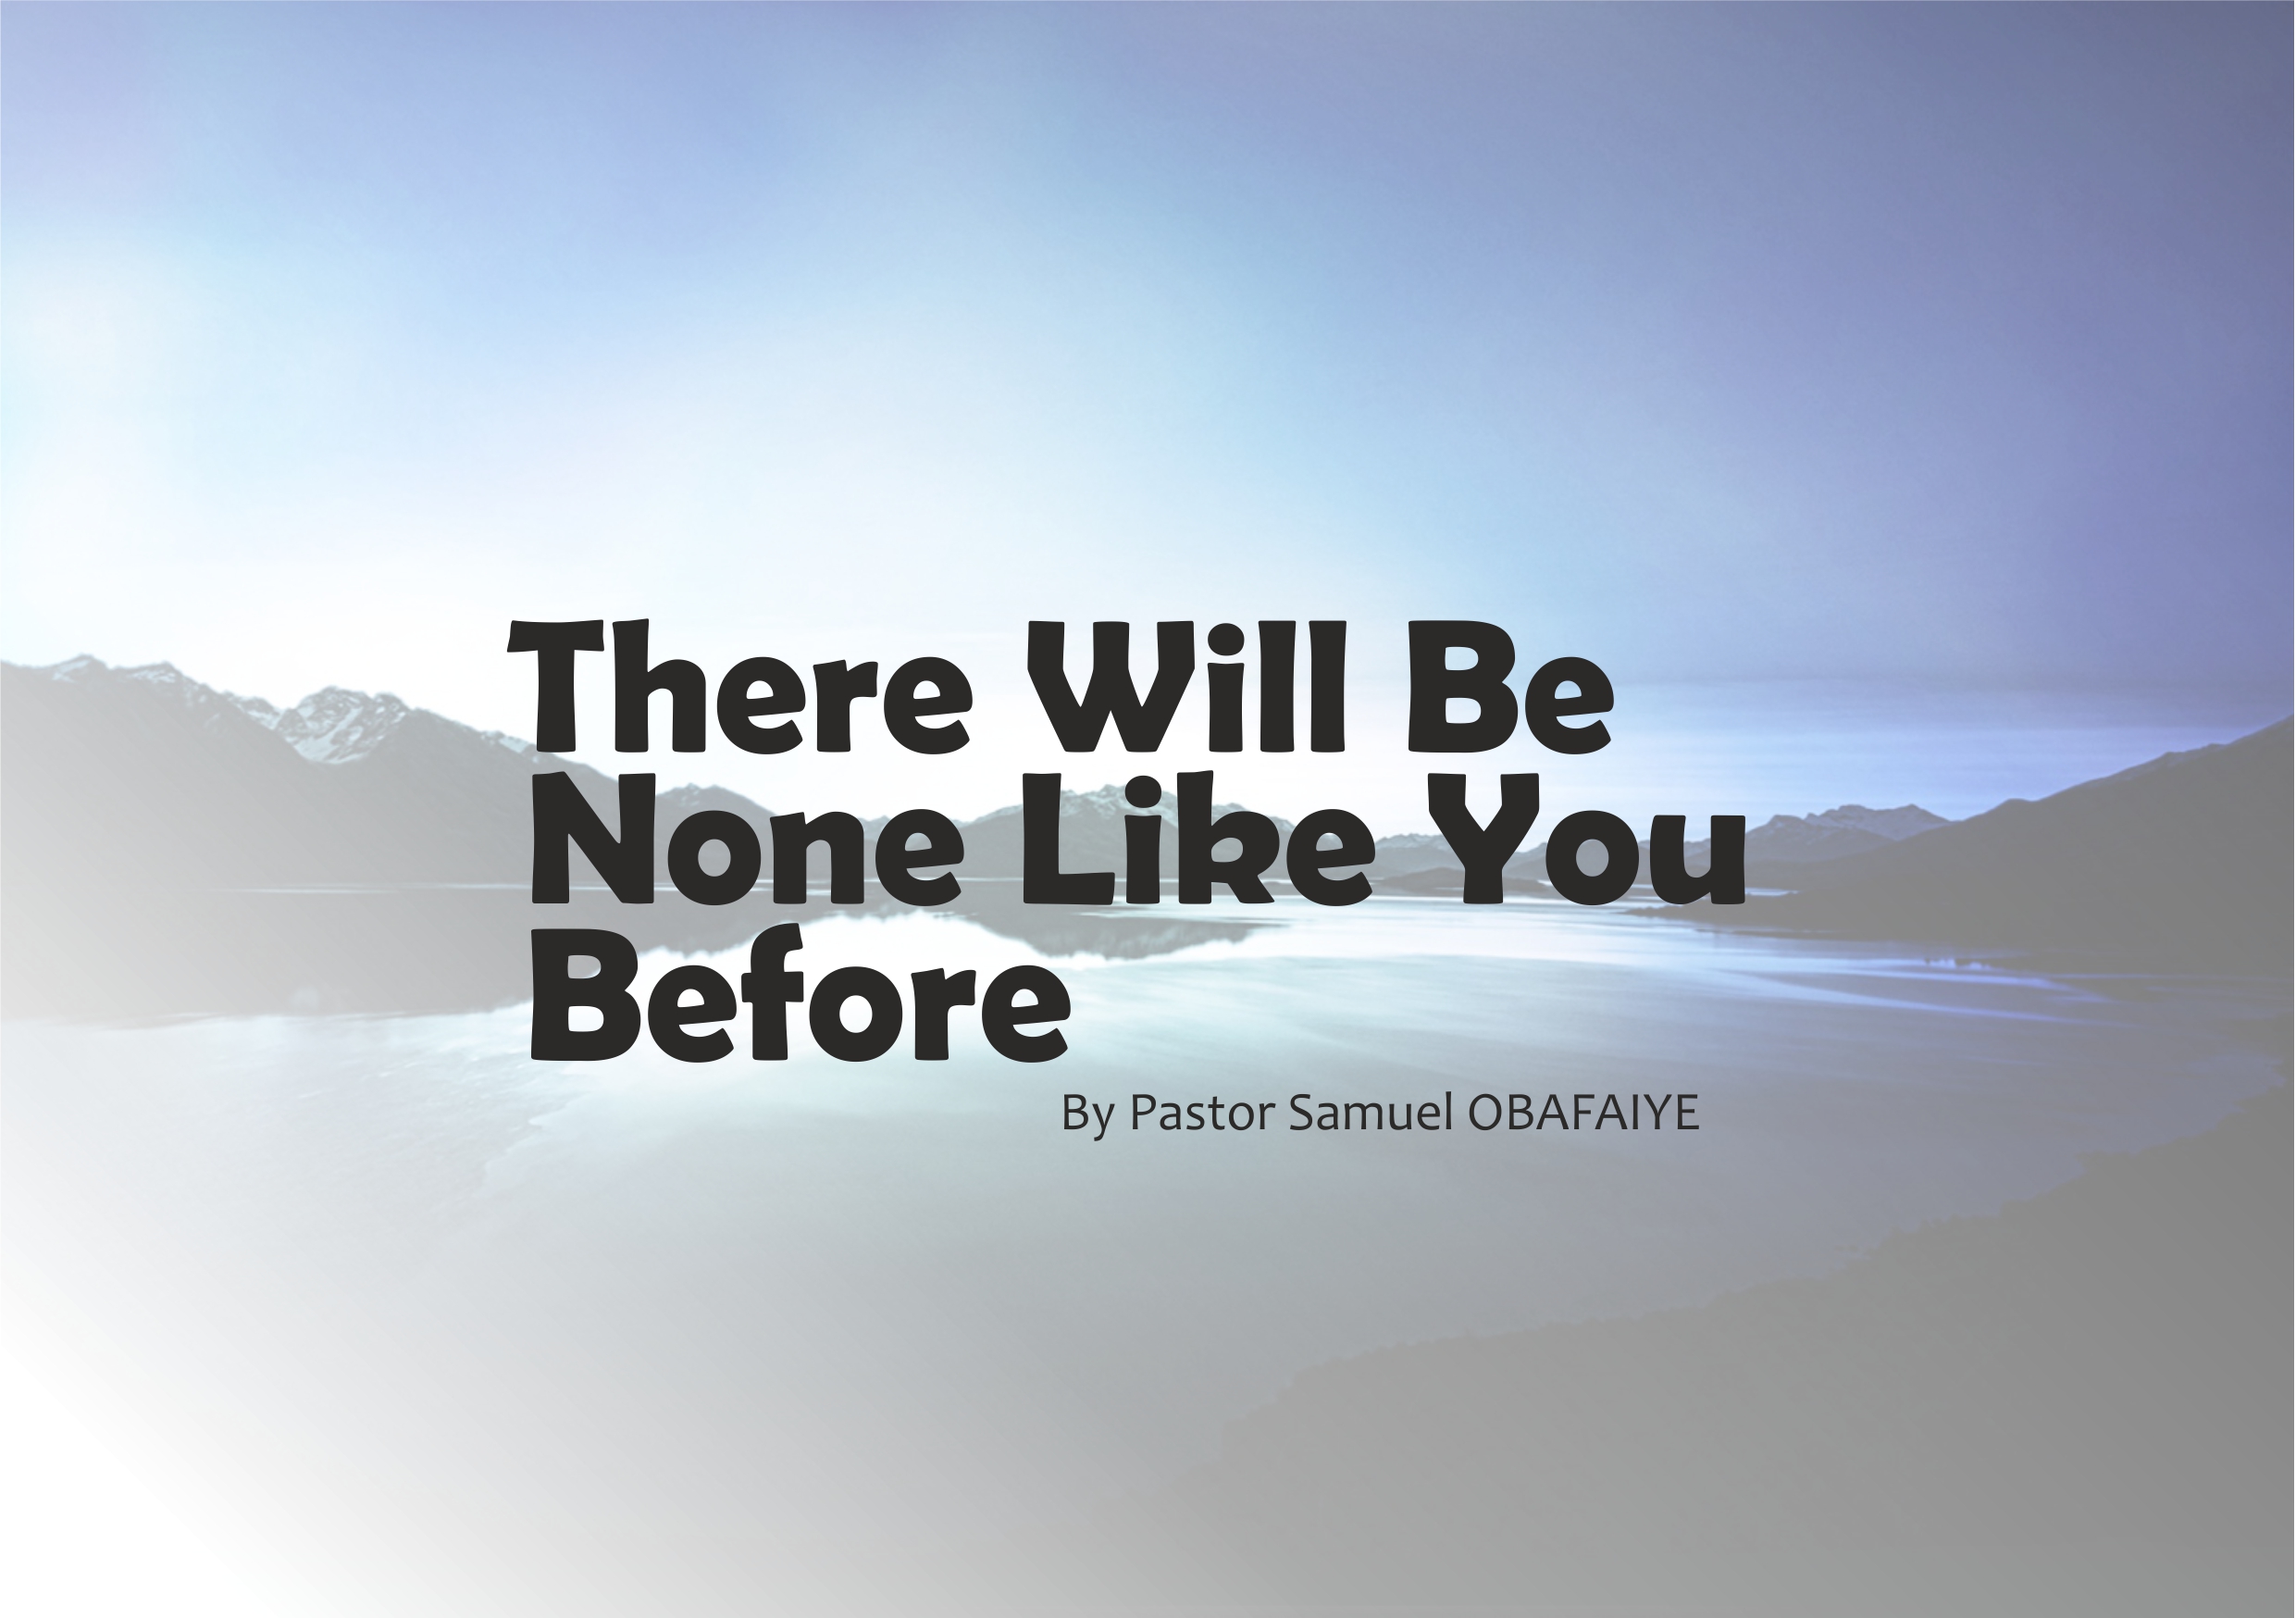 There Will Be None Like You Before, by Pastor Samuel Obafaiye